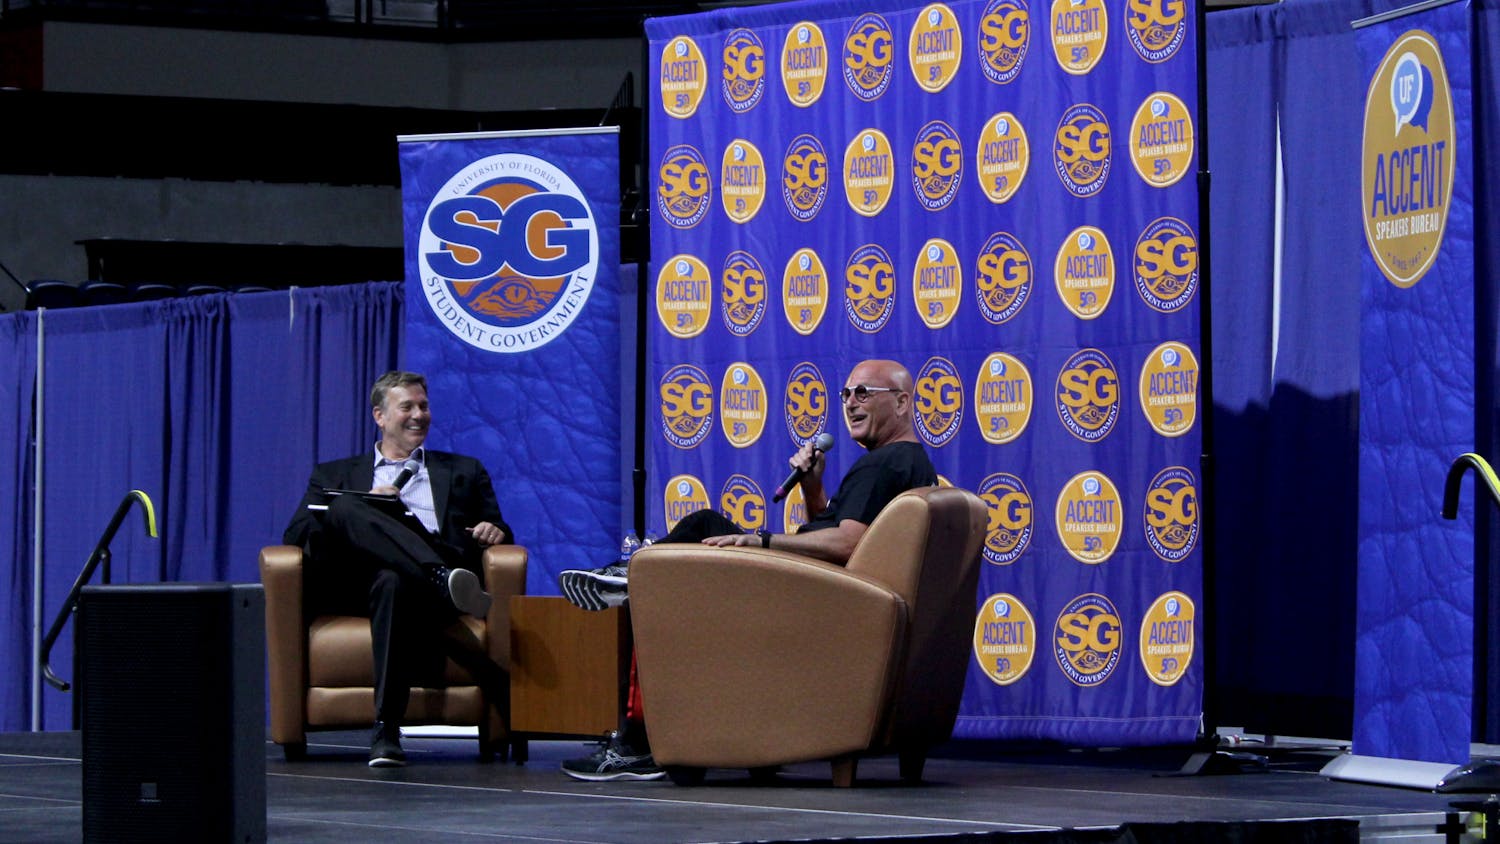 UF journalism department chair Ted Spiker interviews Howie Mandel, a comedian who is known for hosting "Deal or No Deal" and judging "X Factor" at the Stephen C. O'Connell Center on Monday, Feb. 28. 